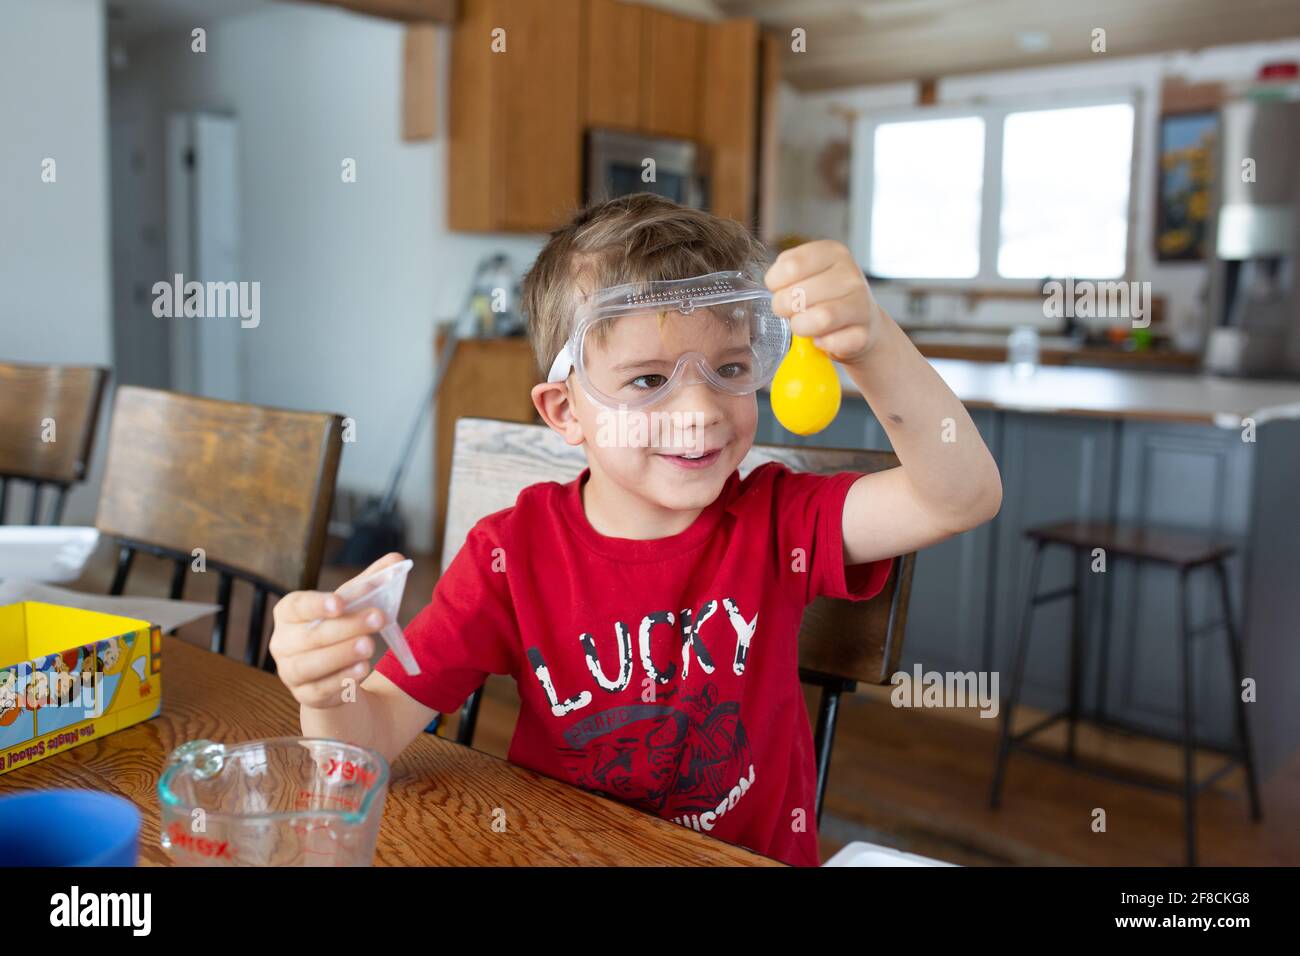 Boy holding up yellow balloon during science experiment at home Stock Photo